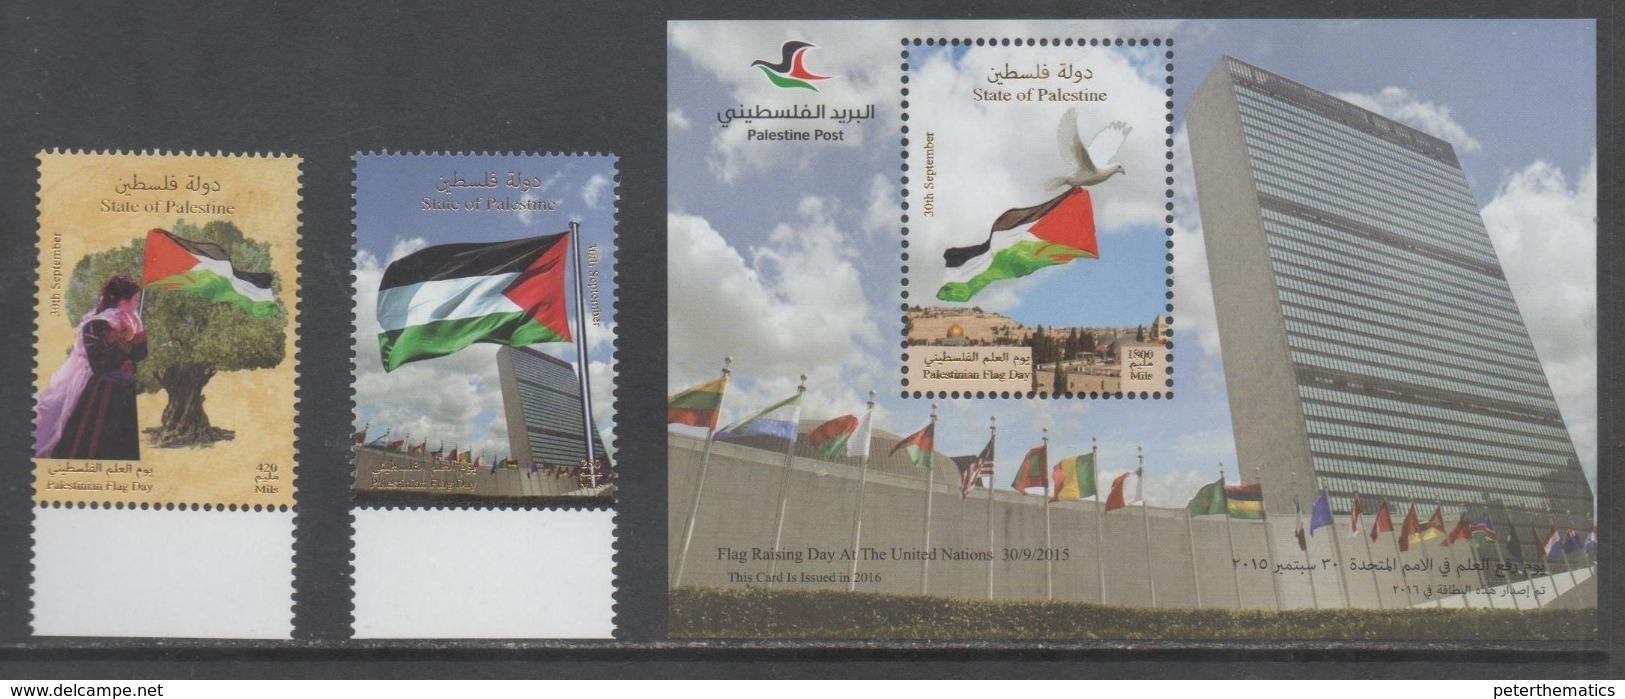 PALESTINE , 2016, PALESTINIAN FLAG DAY, TREES, UN, 2v+ GOLD FOIL S/SHEET - Stamps